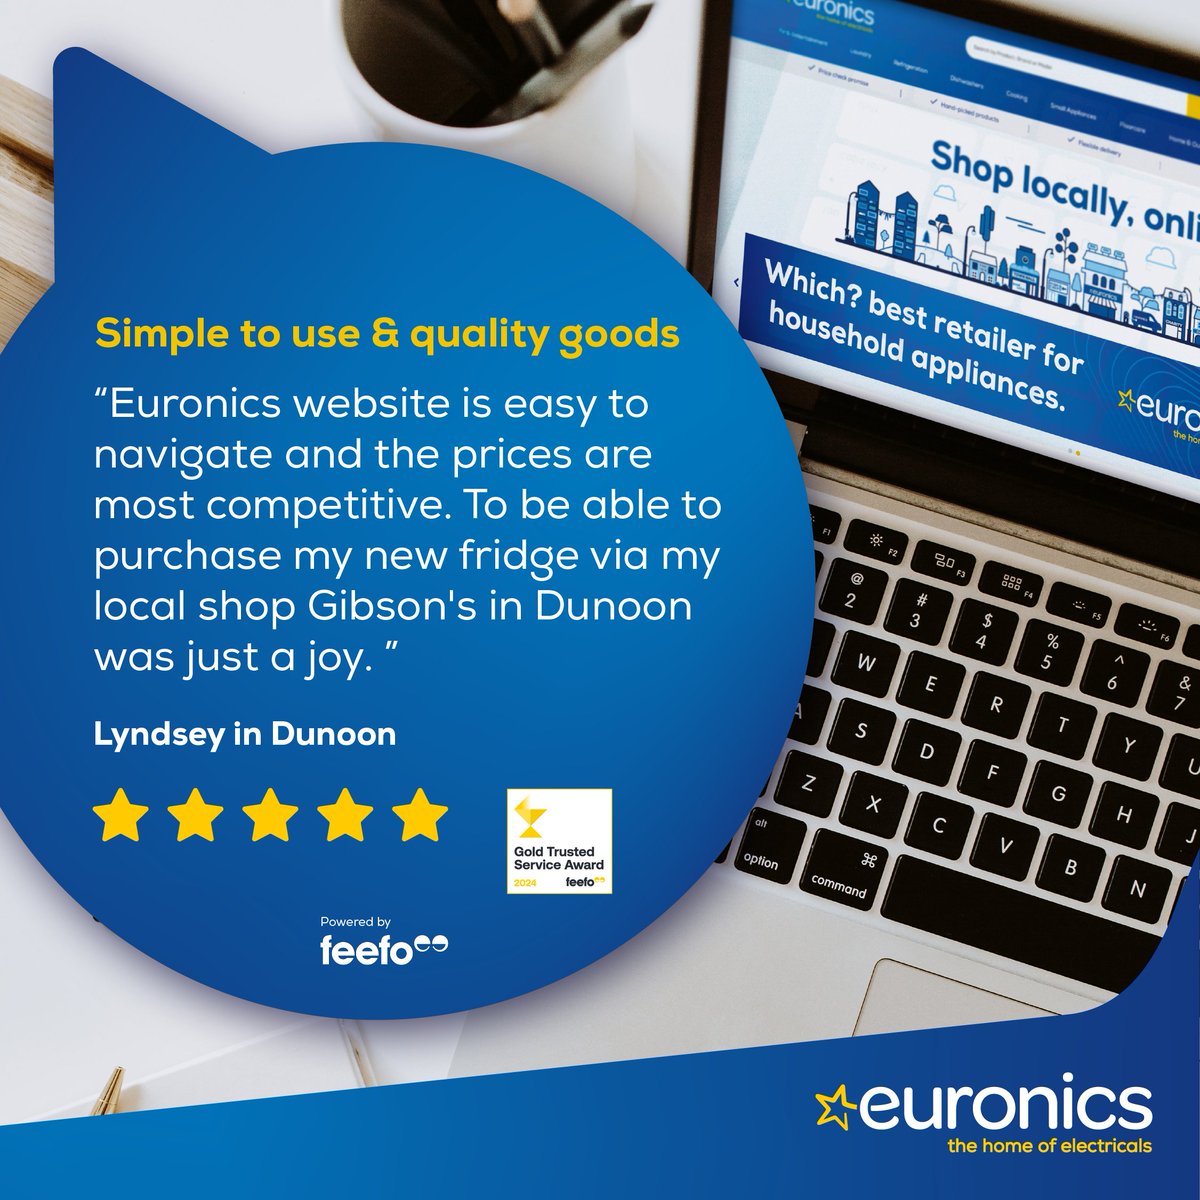 Recently awarded a Gold Trusted Service Award by Feefo, buying your next appliance has never been easier. Shop locally, online at Euronics today - euronics.co.uk #TheHomeofElectricals #ShopLocal